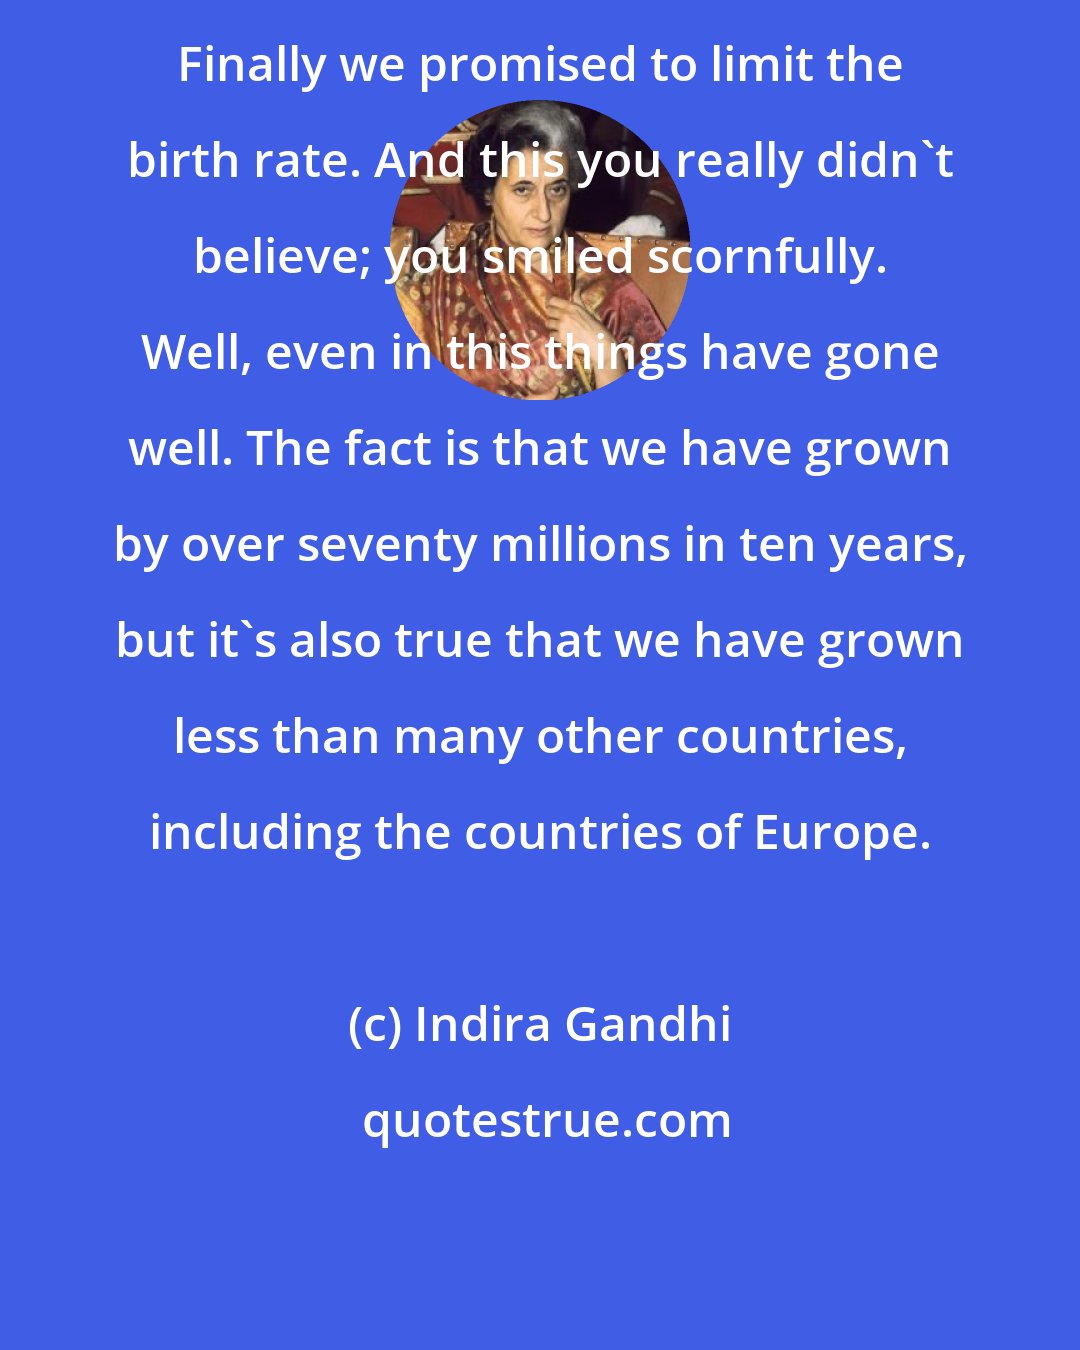 Indira Gandhi: Finally we promised to limit the birth rate. And this you really didn't believe; you smiled scornfully. Well, even in this things have gone well. The fact is that we have grown by over seventy millions in ten years, but it's also true that we have grown less than many other countries, including the countries of Europe.